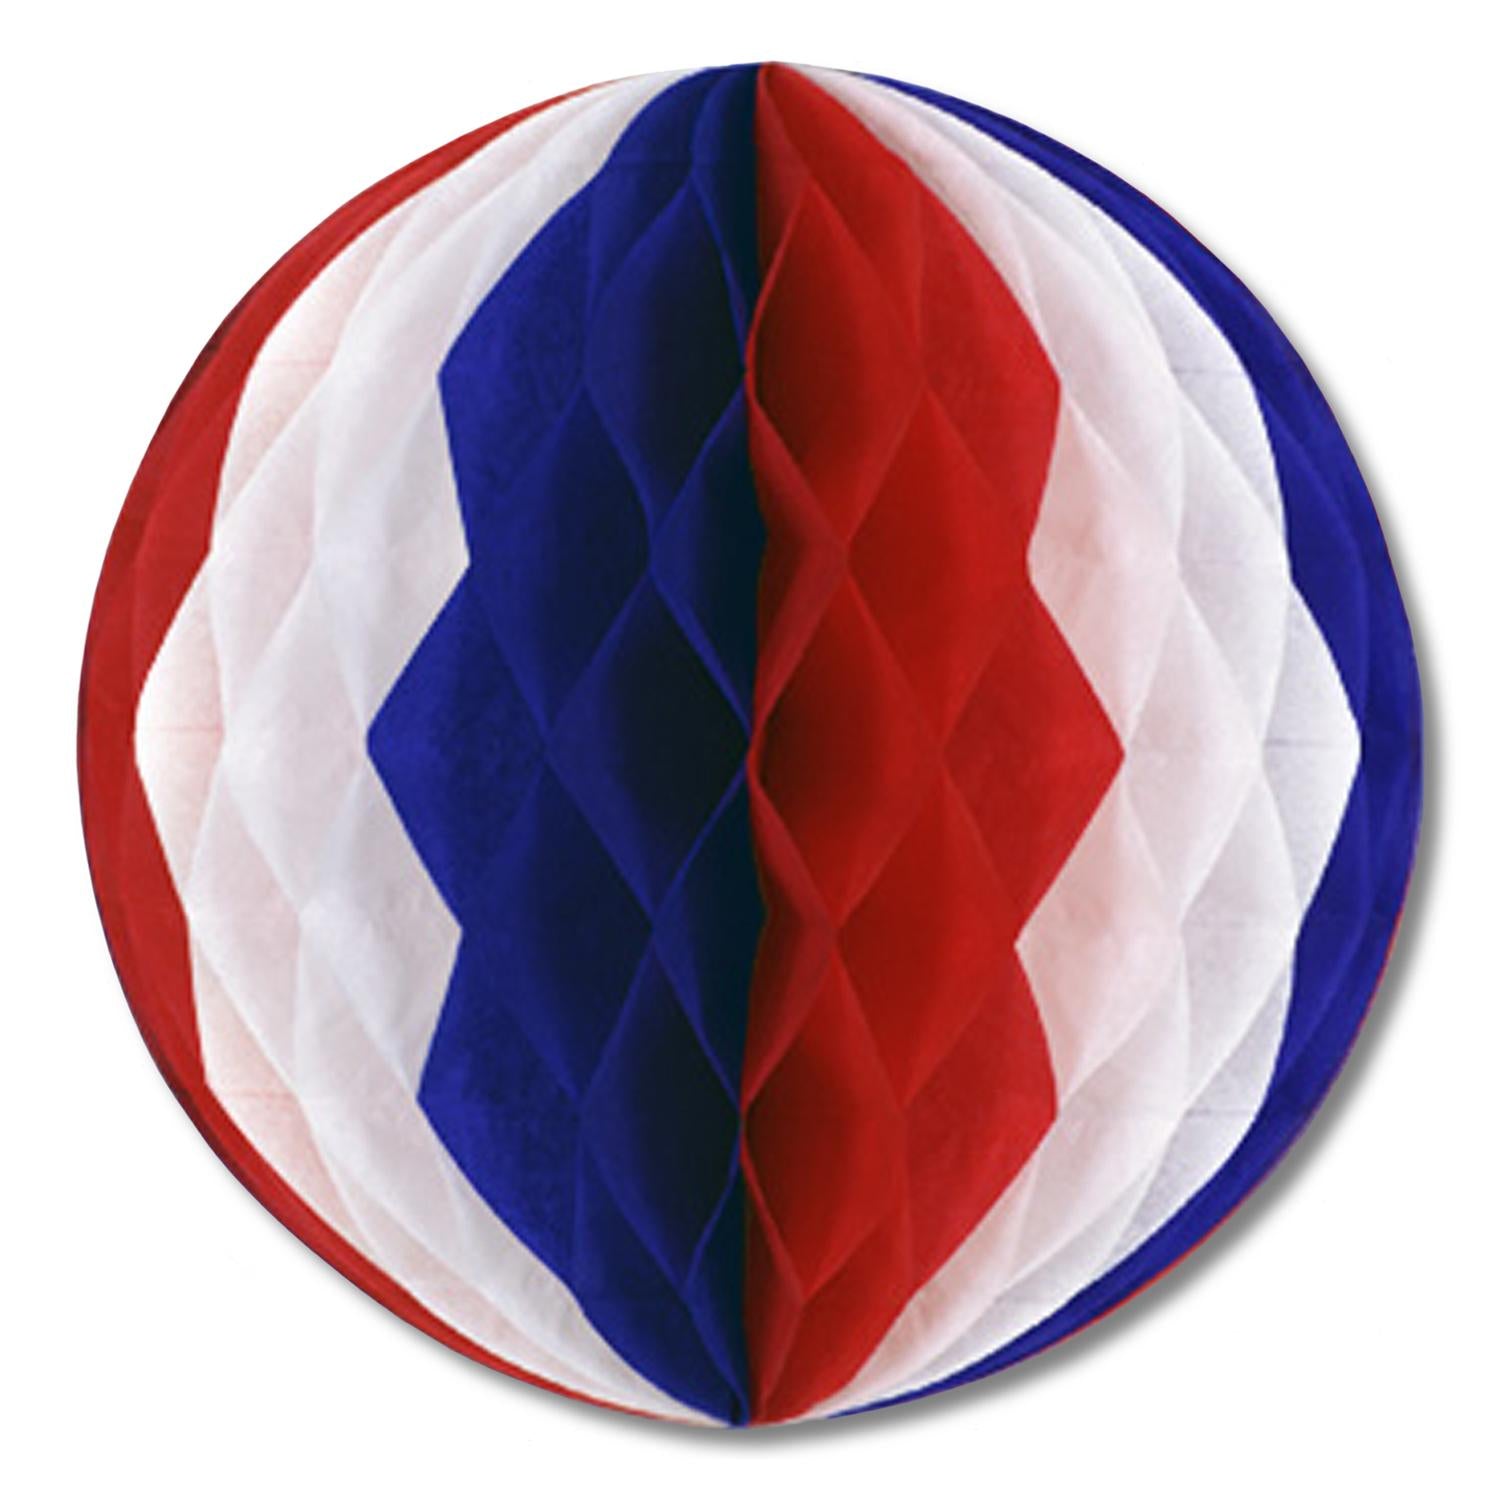 14 Inch-Beistle Tissue Party Ball - red - white - blue